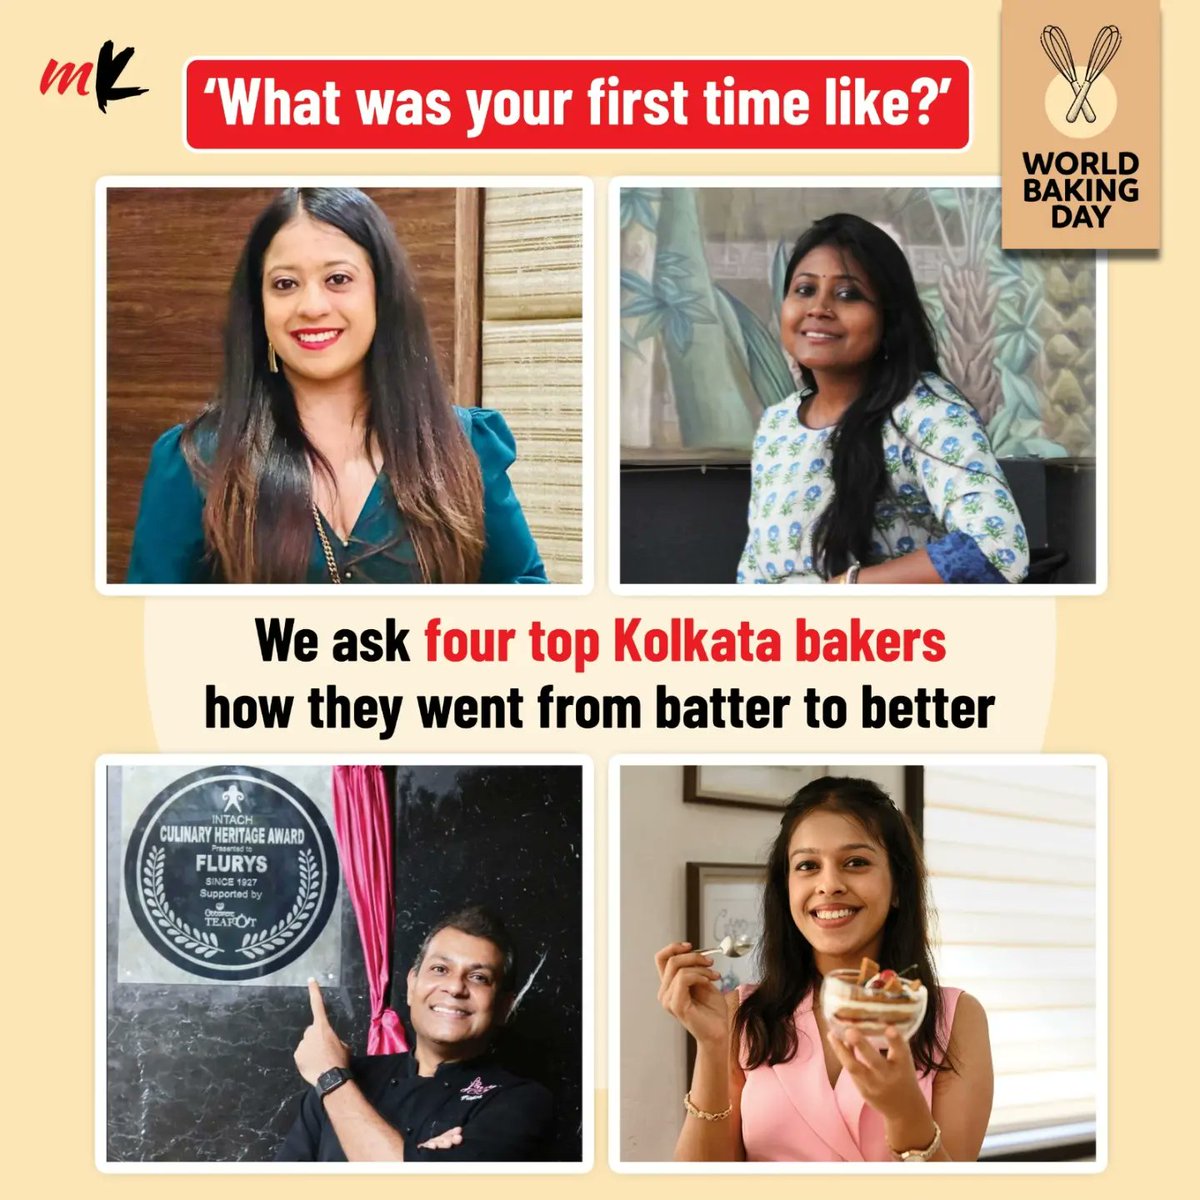 On World Baking Day, bakers from Kolkata recall their hands on baking for the first time. Read the fun stories here: telegraphindia.com/my-kolkata/foo… #WorldBakingDay #Baking #KolkataBakers #KolkataBakery #Bakers #Flurys #SaldanhaBakery #MasterChefIndia #Cakes #Kolkata #MyKolkata